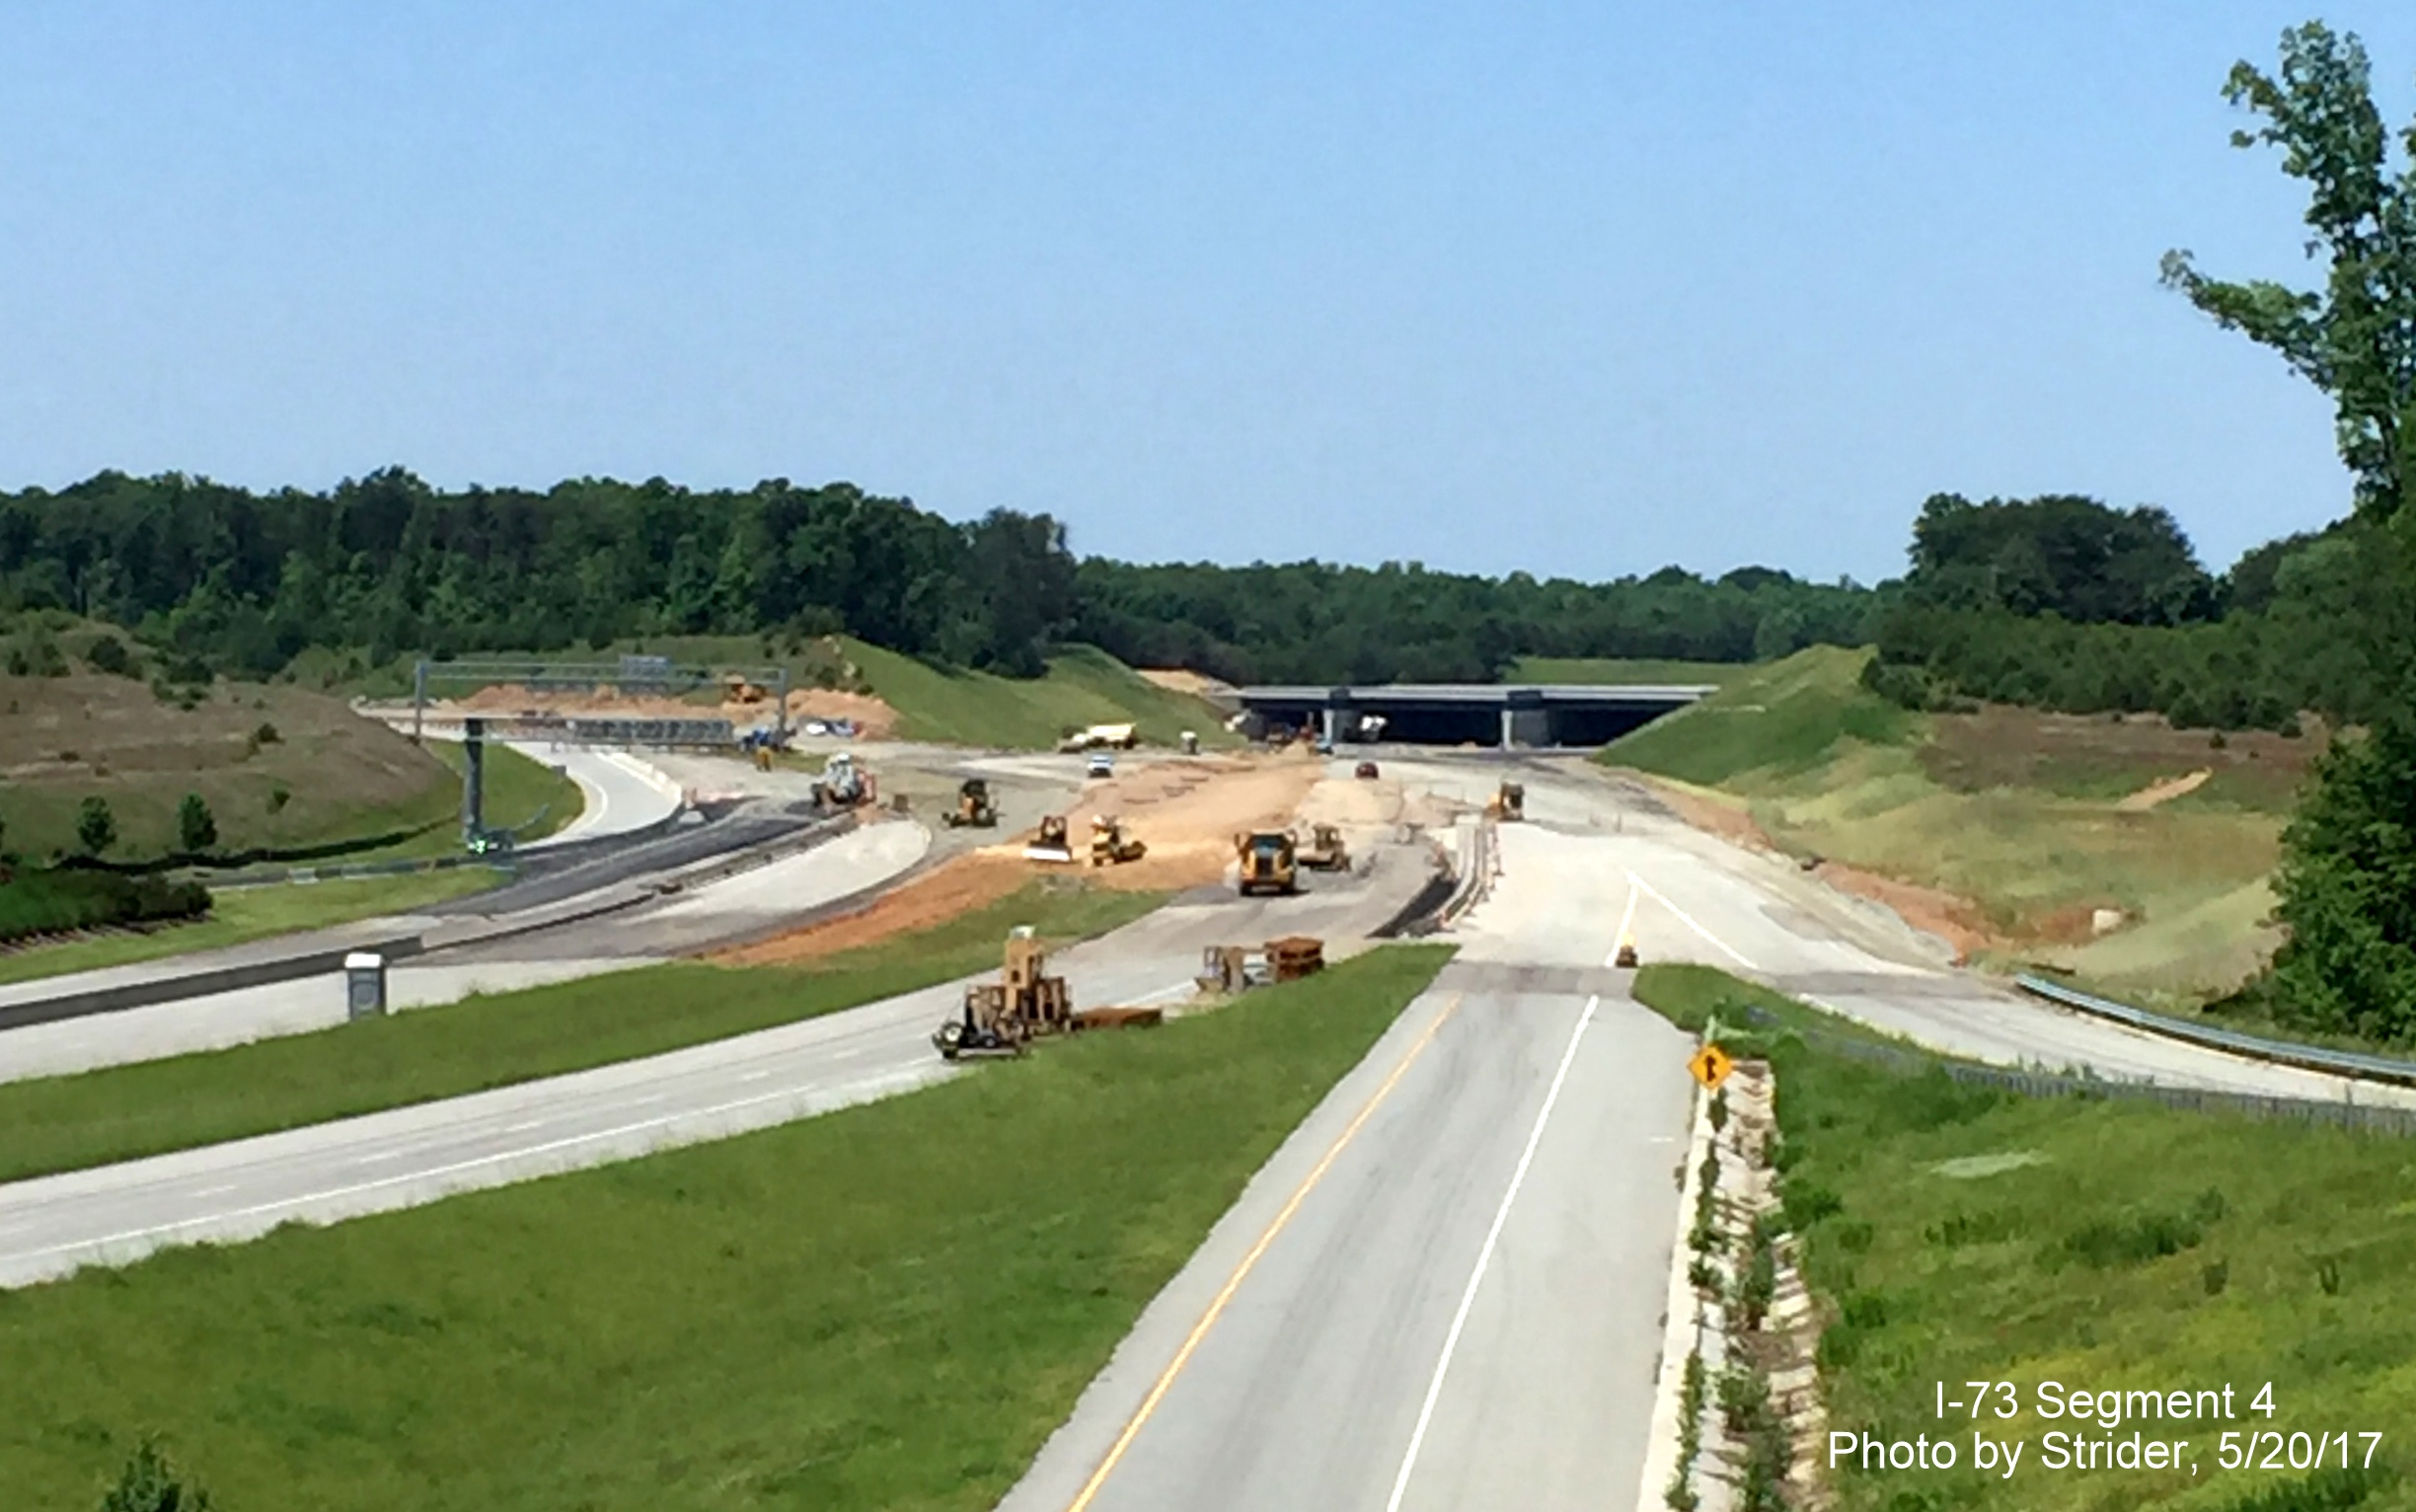 Image taken from Old Oak Ridge Rd bridge over Bryan Blvd showing progress in connecting I-73 to existing roadway, from Strider